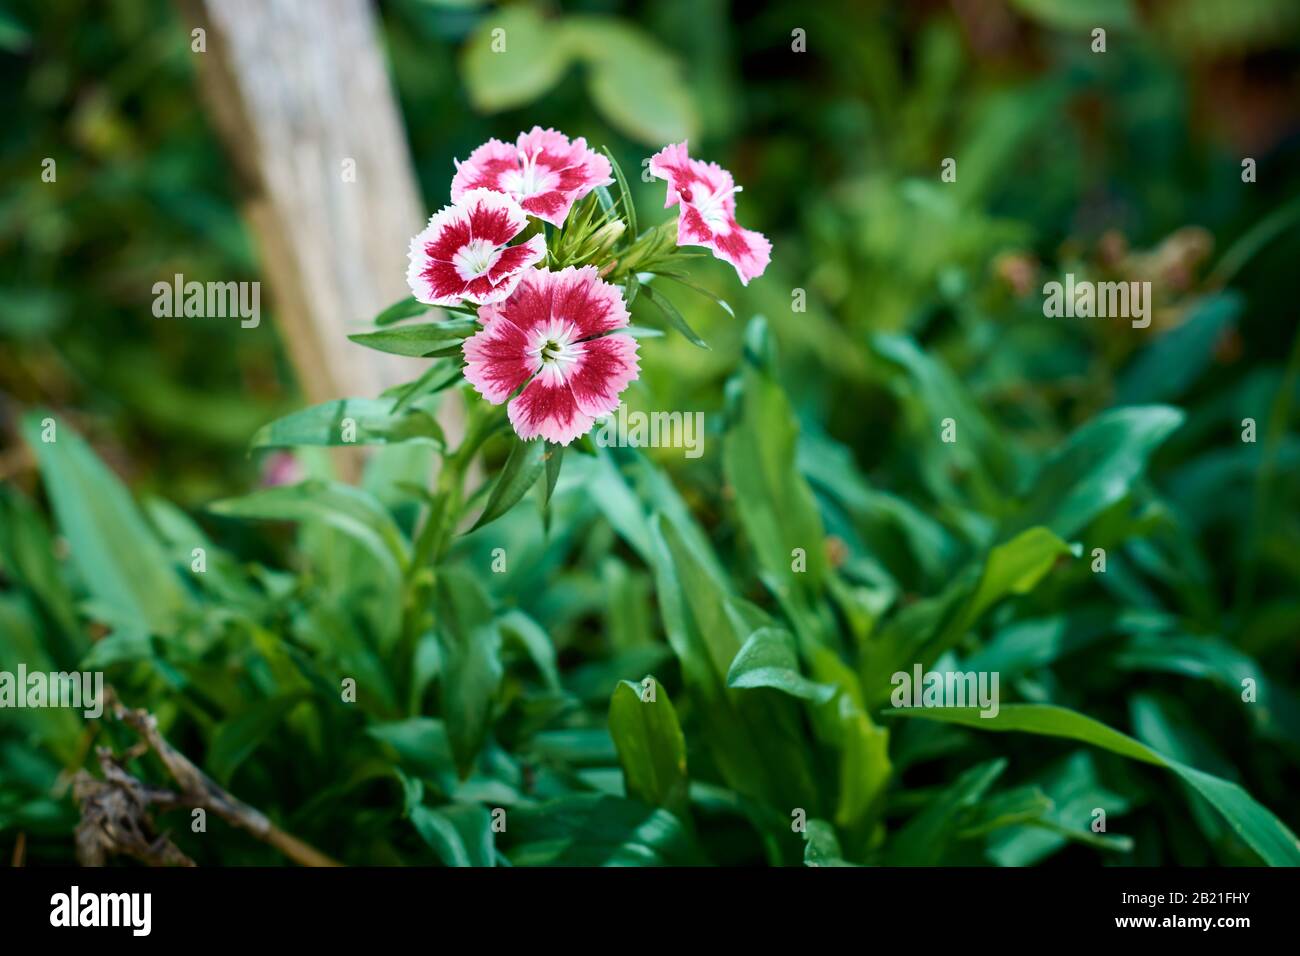 Closeup of flowers of red Sweet William (Dianthus Barbatus) in the garden of a house with blurry green background of grass. Stock Photo